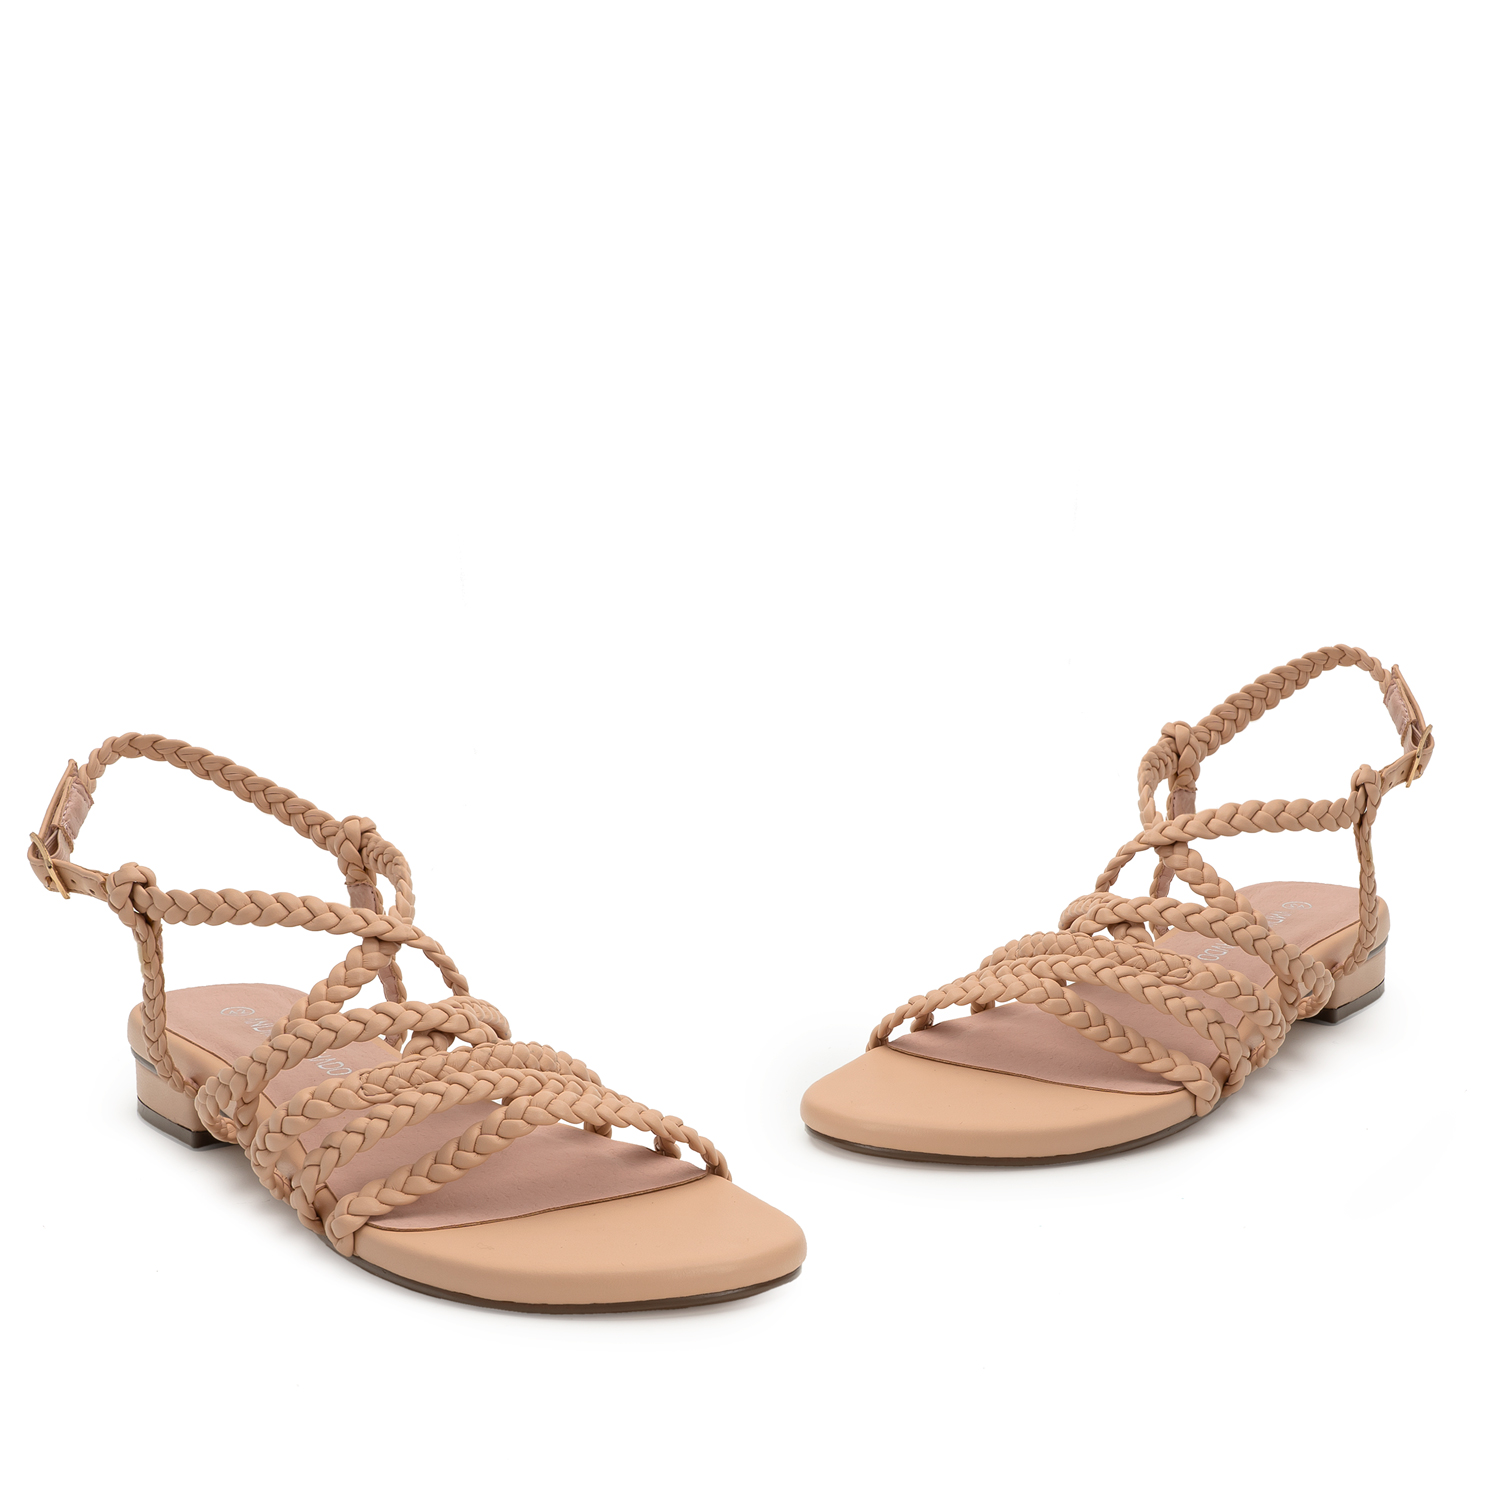 Braided Nude Faux Leather Sandals 